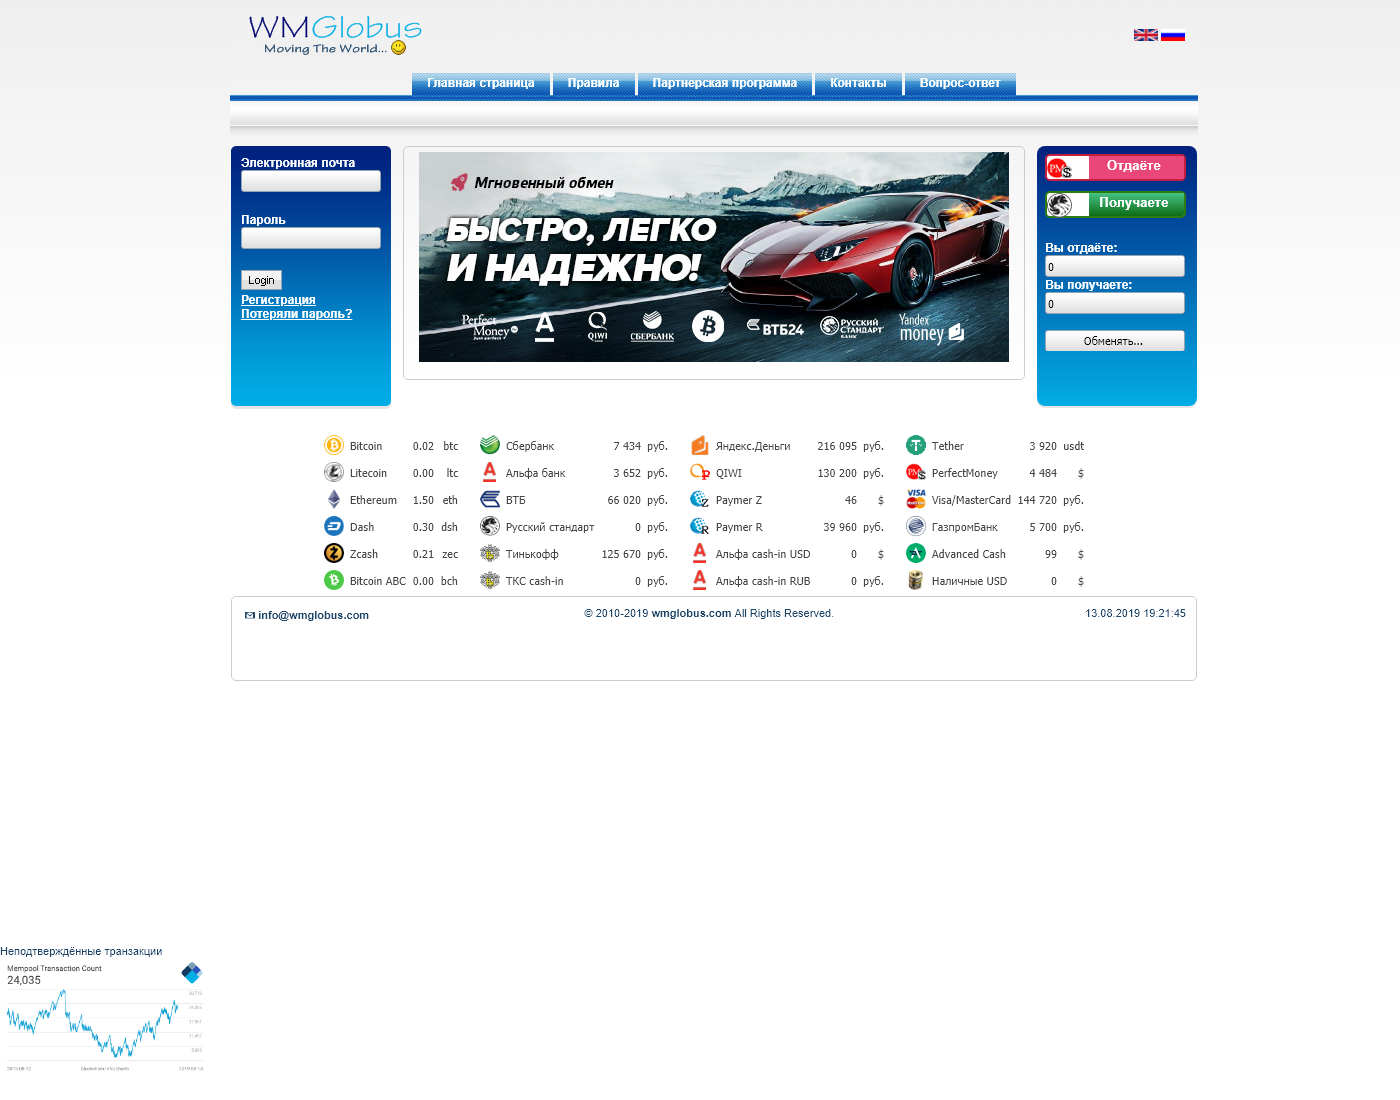 wmglobus user interface: the home page in English